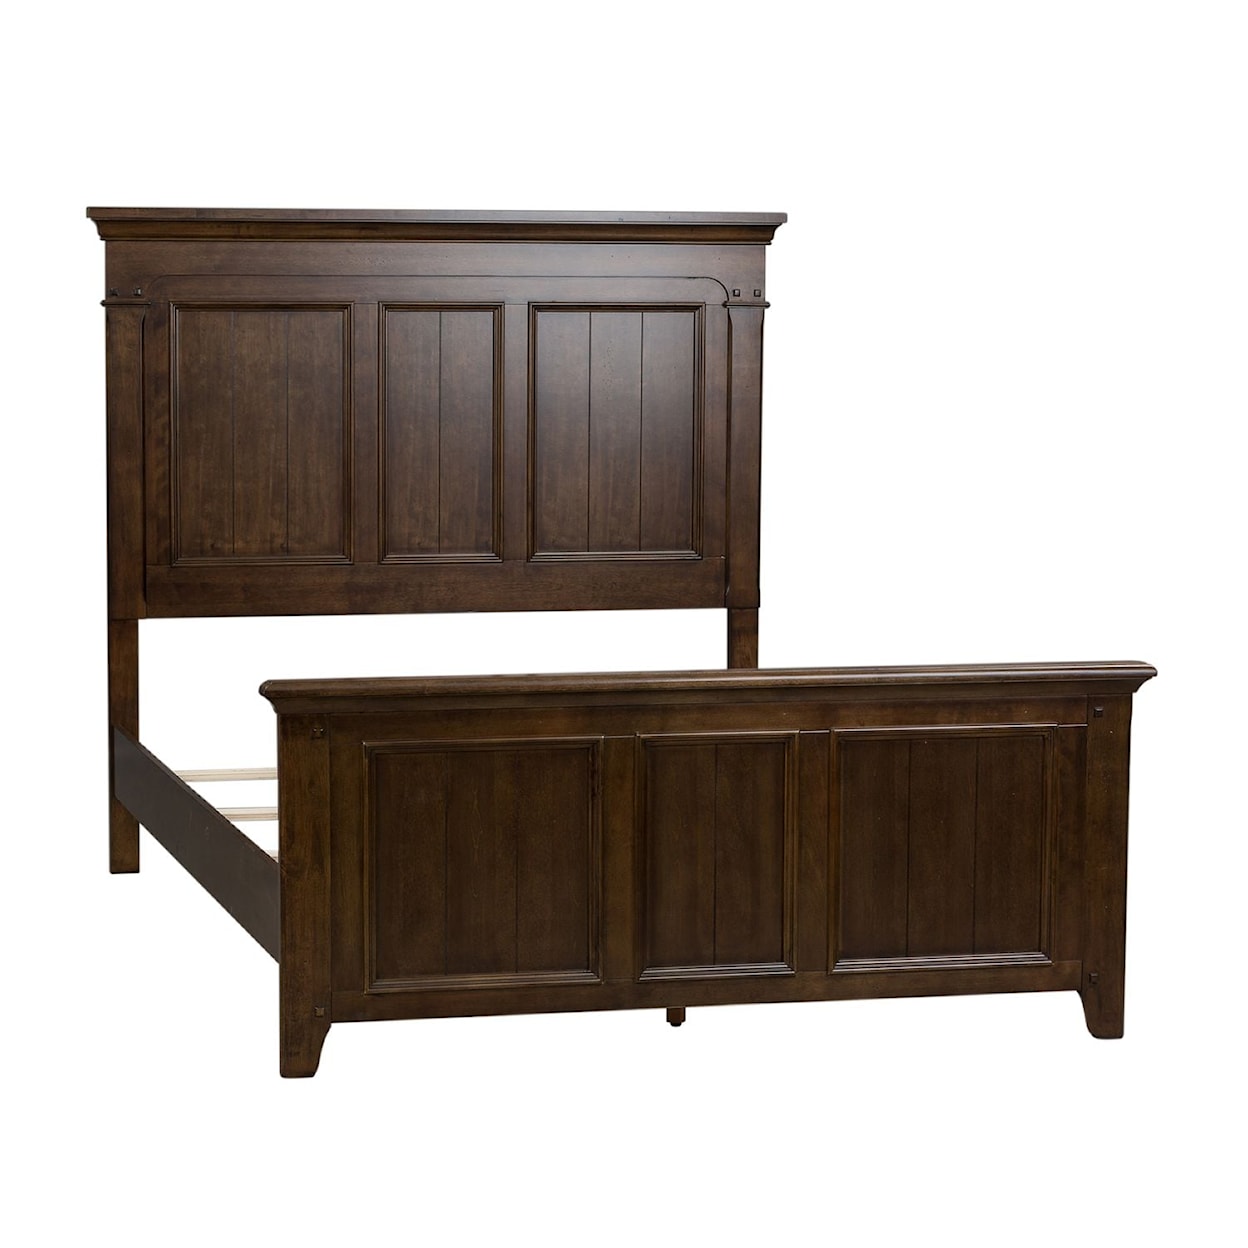 Libby Saddlebrook Queen Panel Bedroom Group